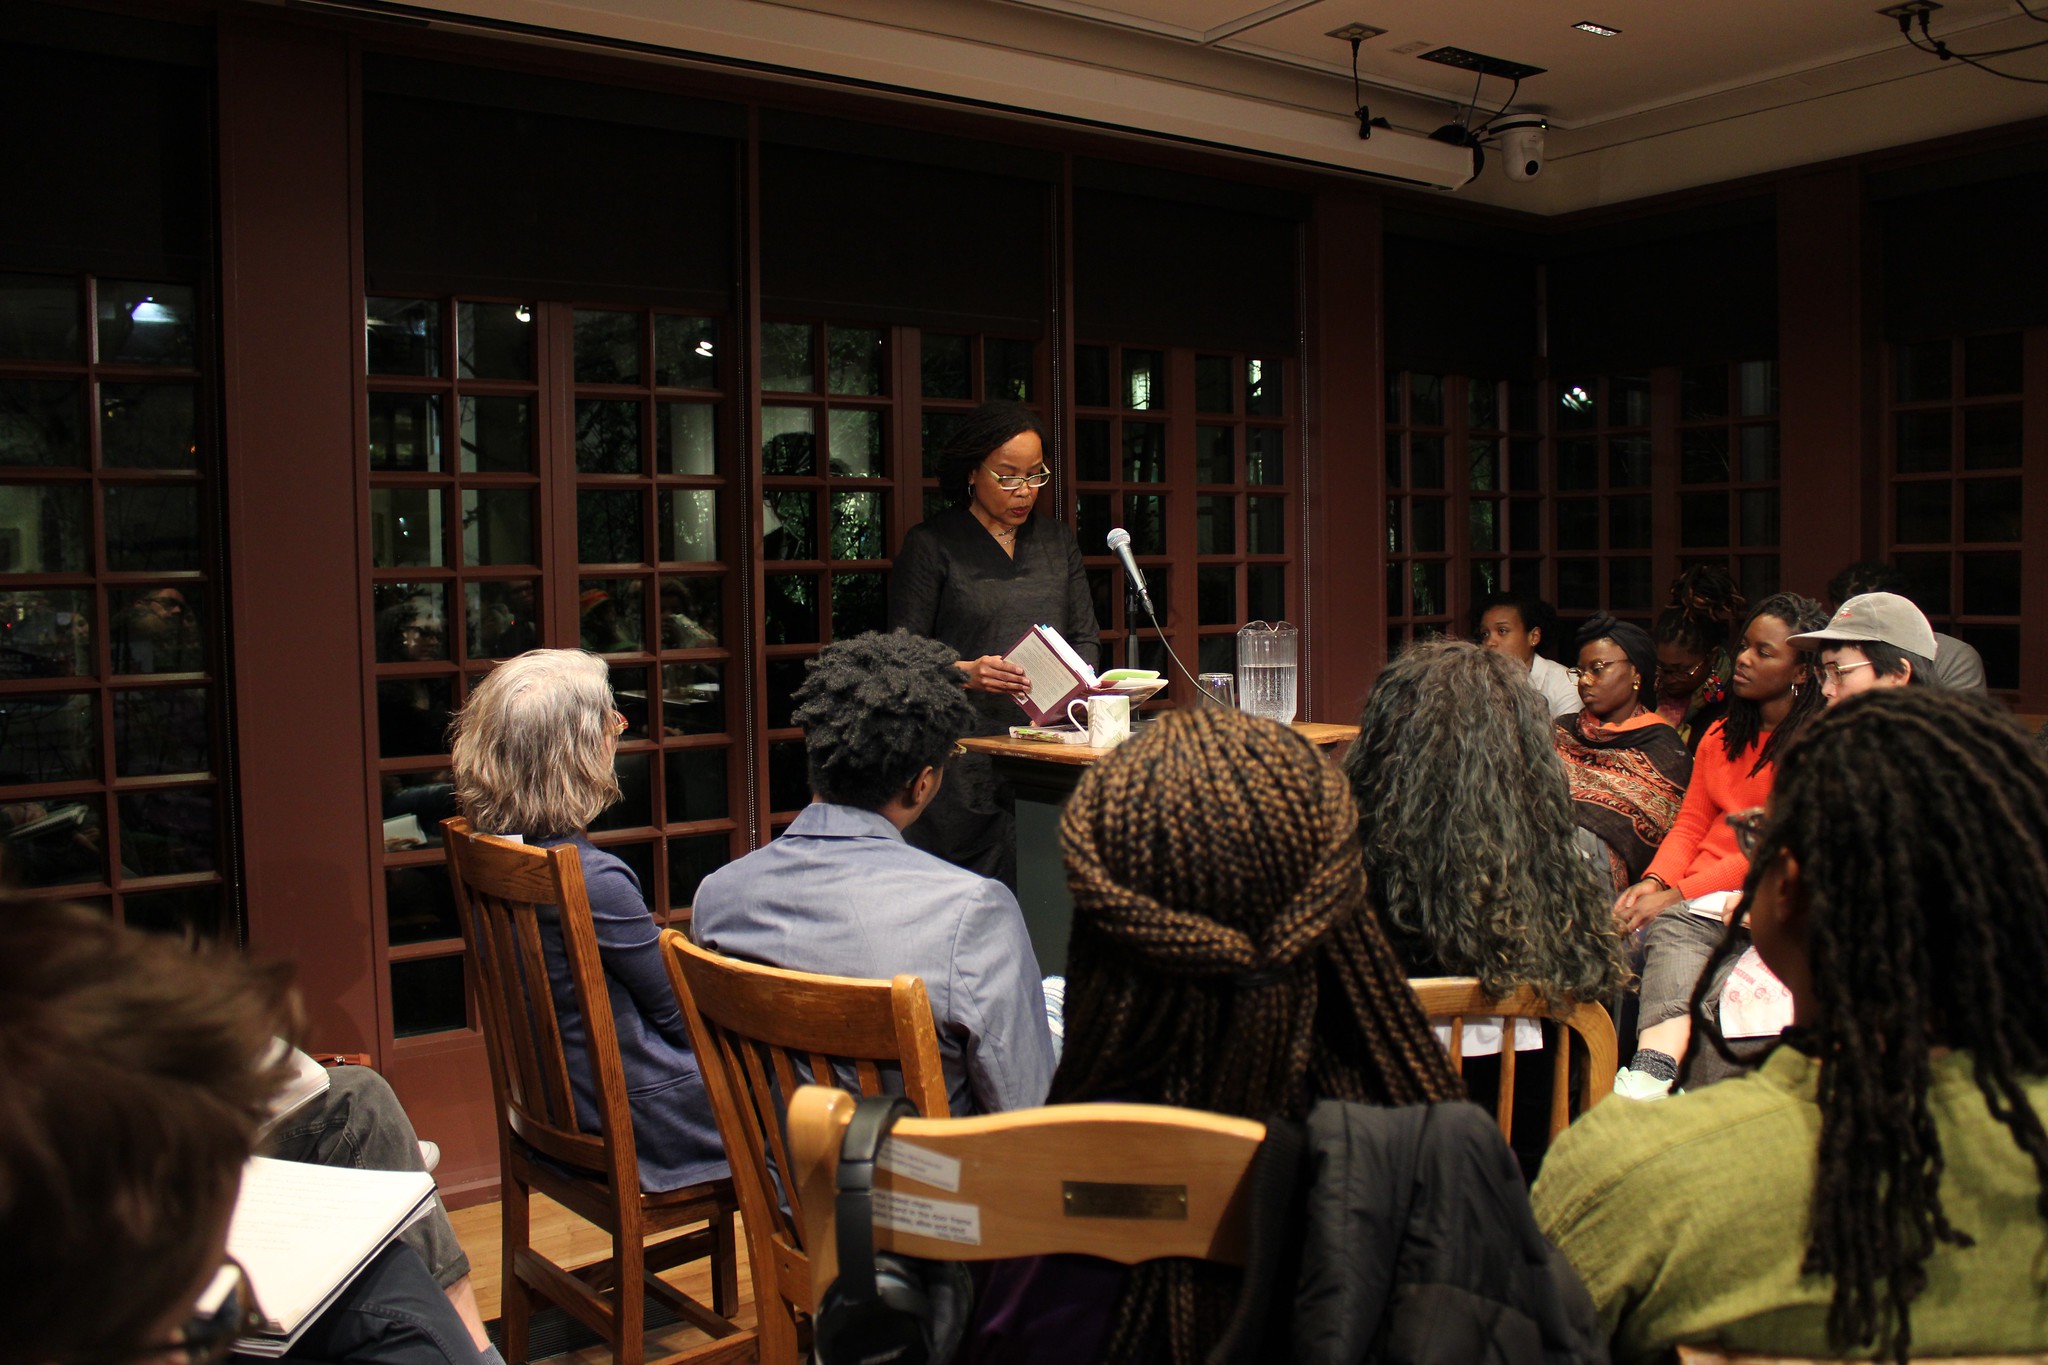 Writer reading from a book with 10 people seated in front of her in a windowed room. 